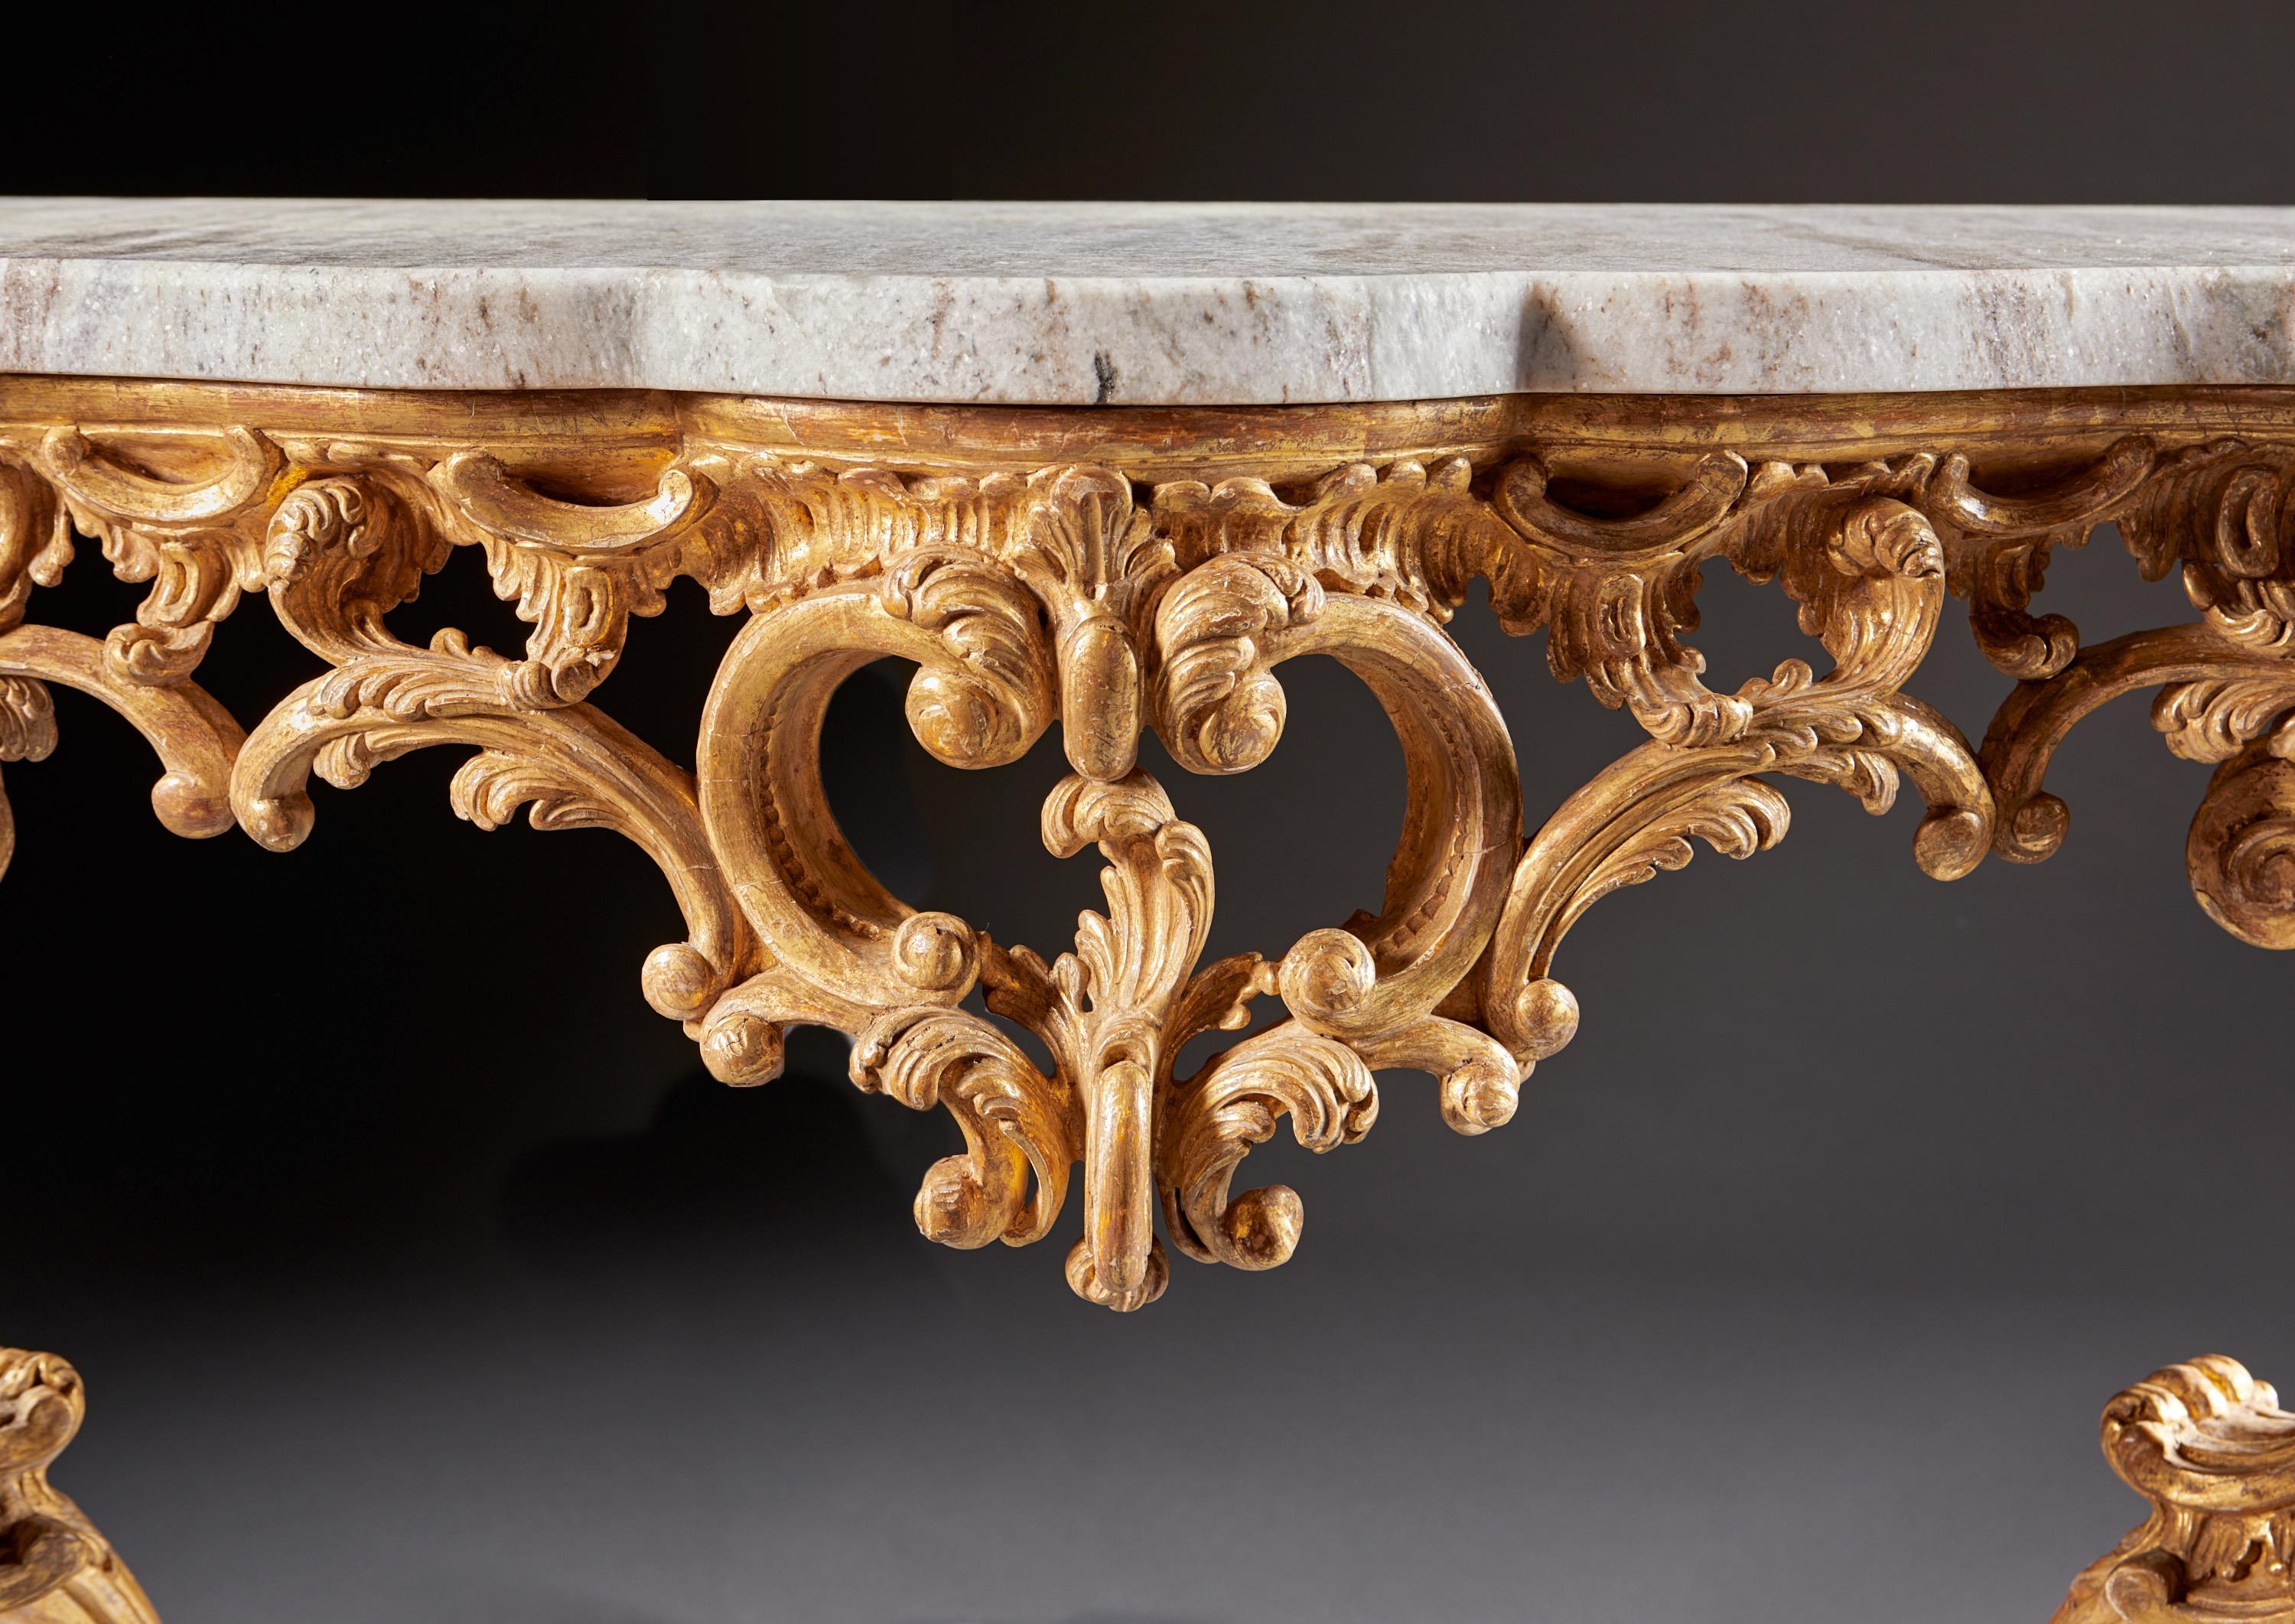 Exceptional English George III Period Carved and Gilded Rococo Console Table For Sale 3